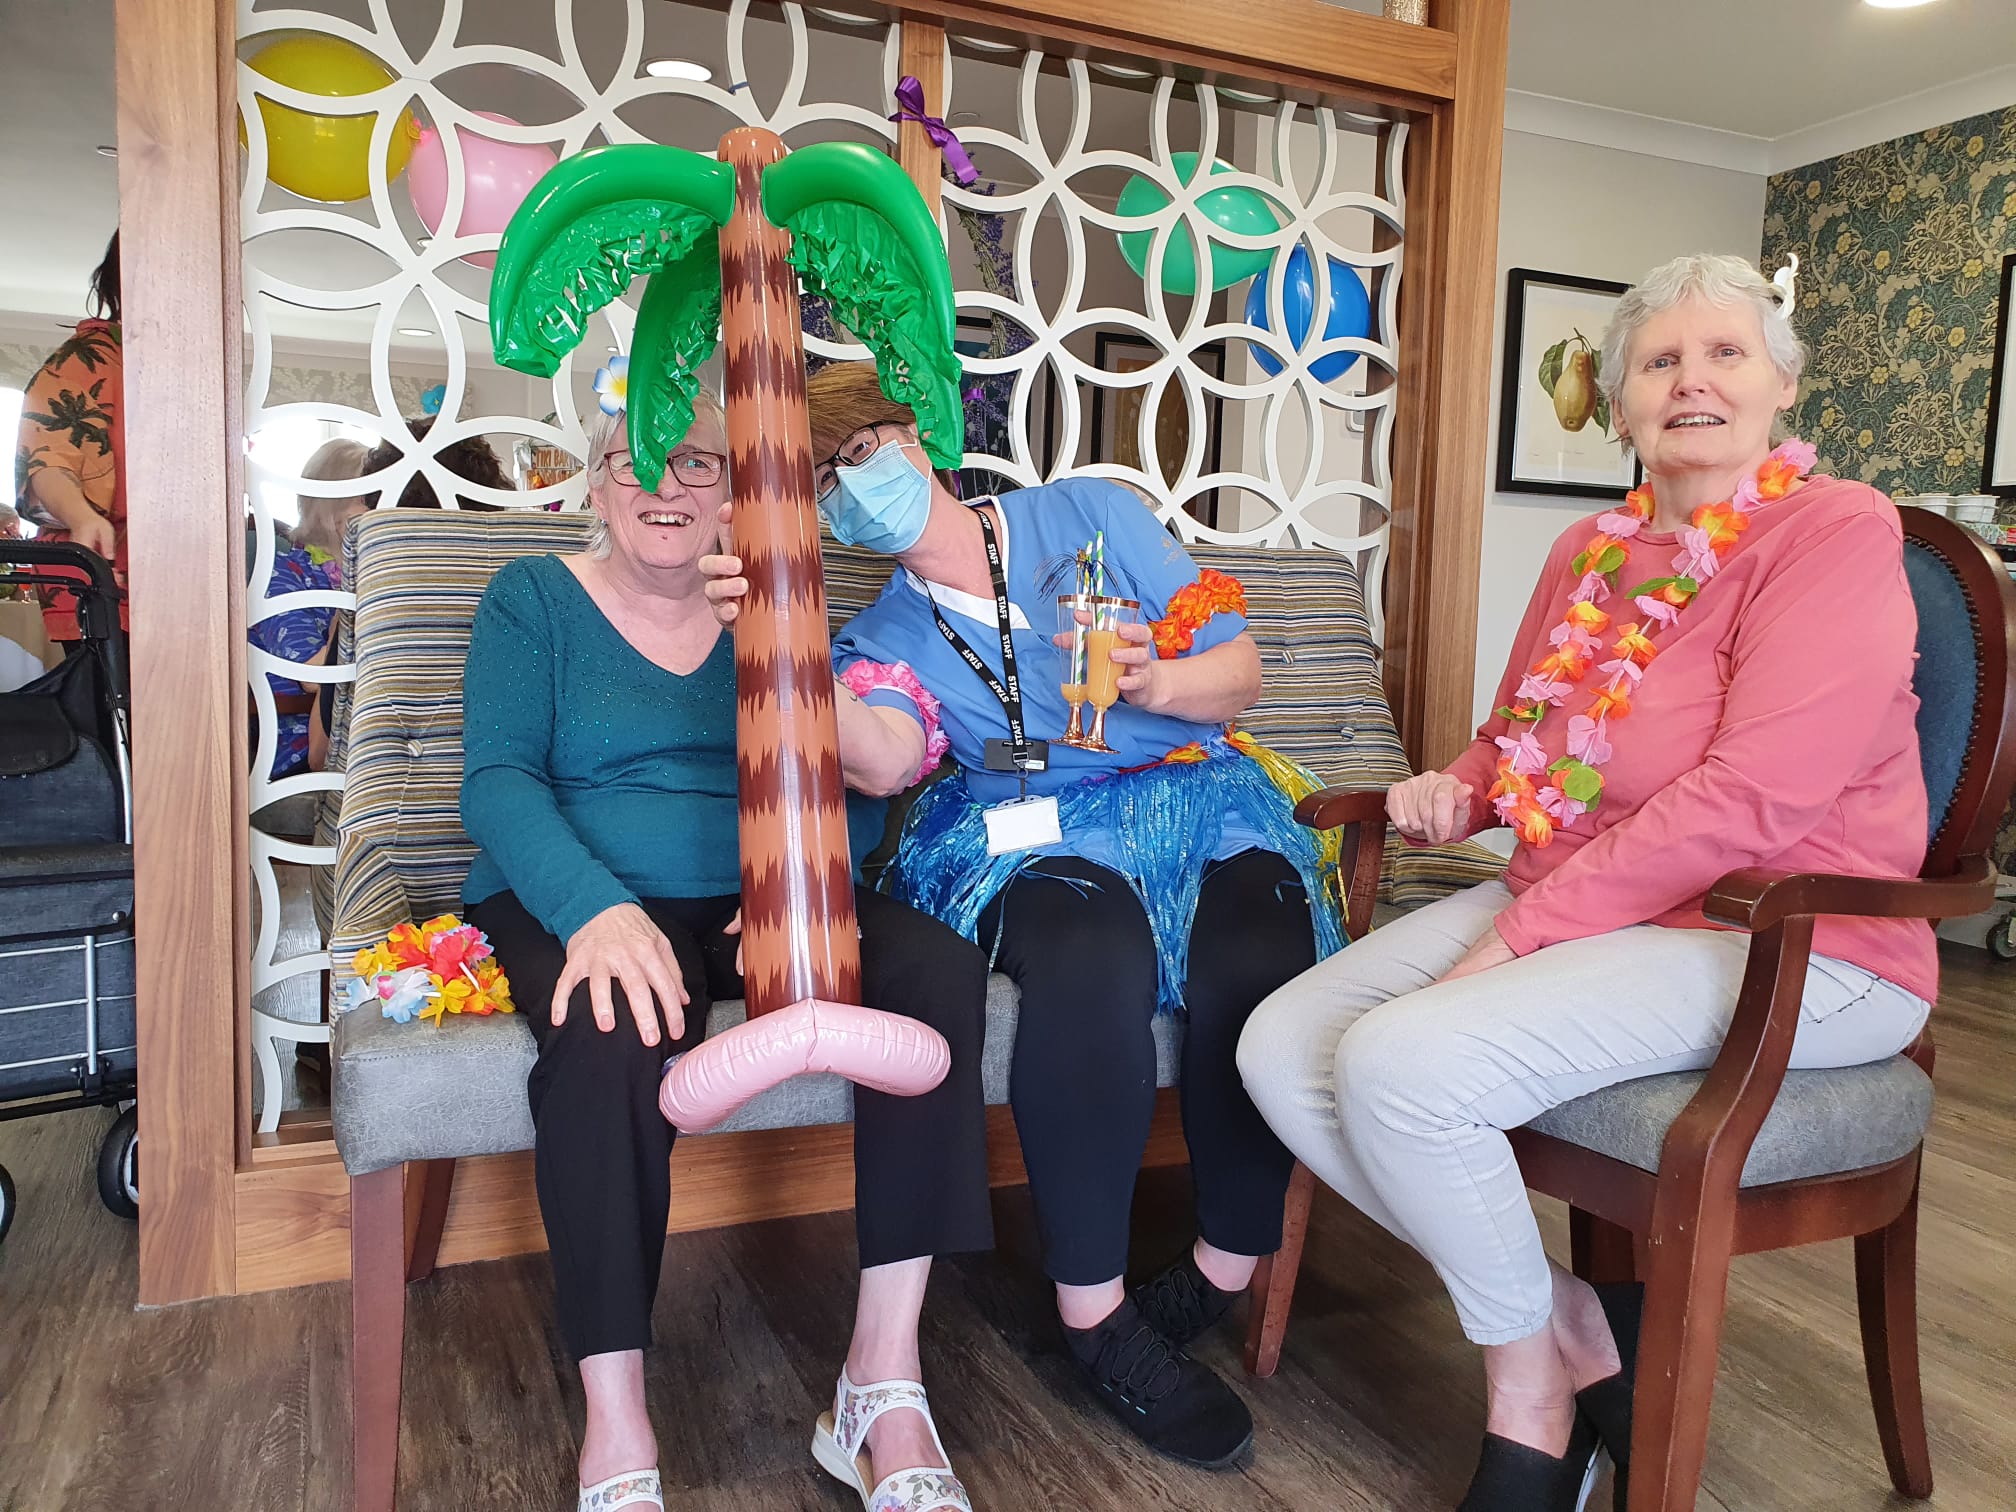 Residents and Staff Celebrating at Hawaiian Party